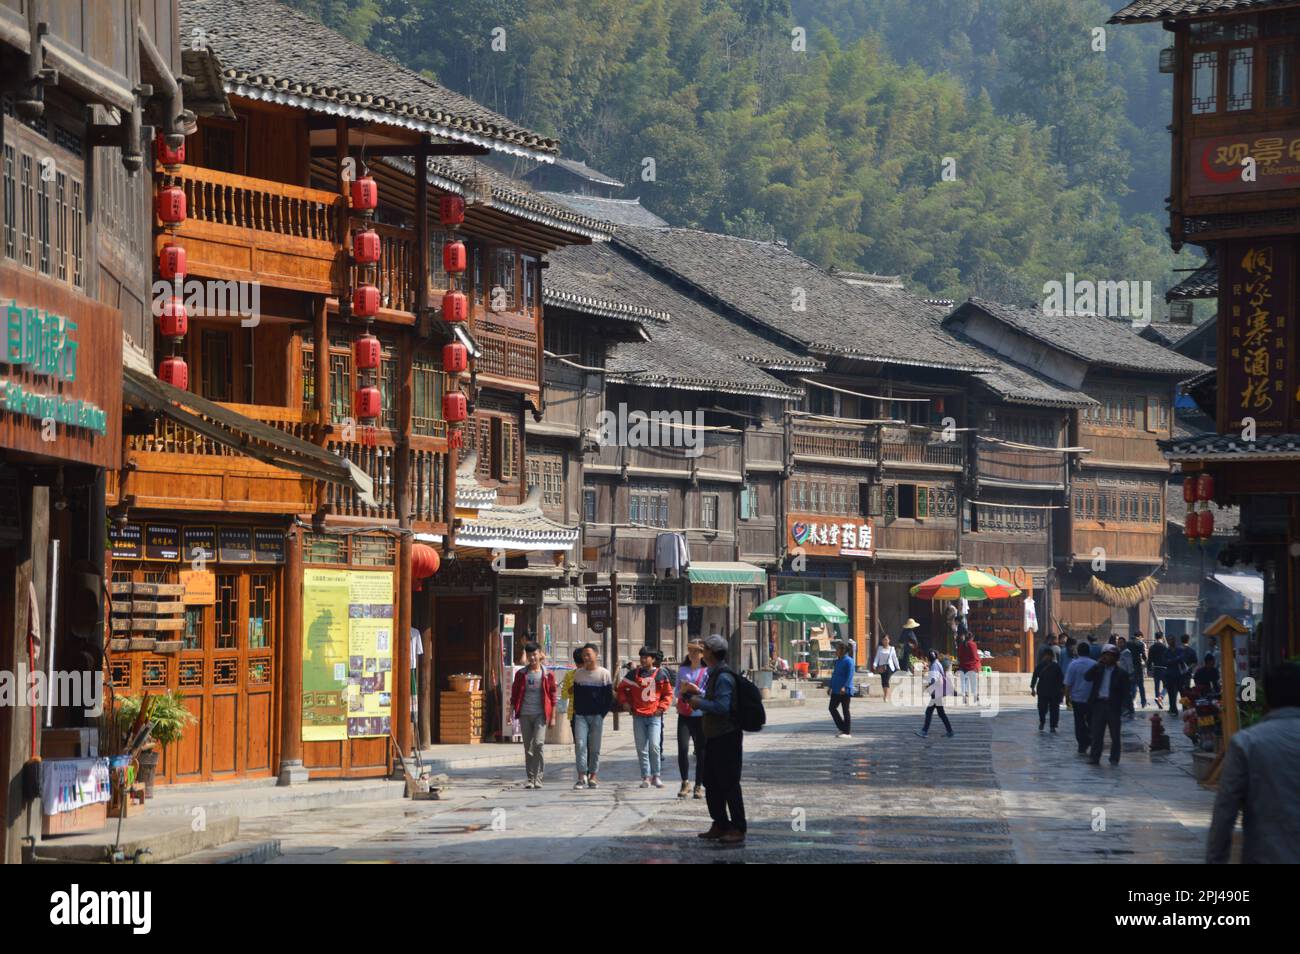 People's Republic of China, Guizhou Province,  Zhaoxing Dong Village:  historic wooden houses on the main street, with wooded hills behind. Stock Photo